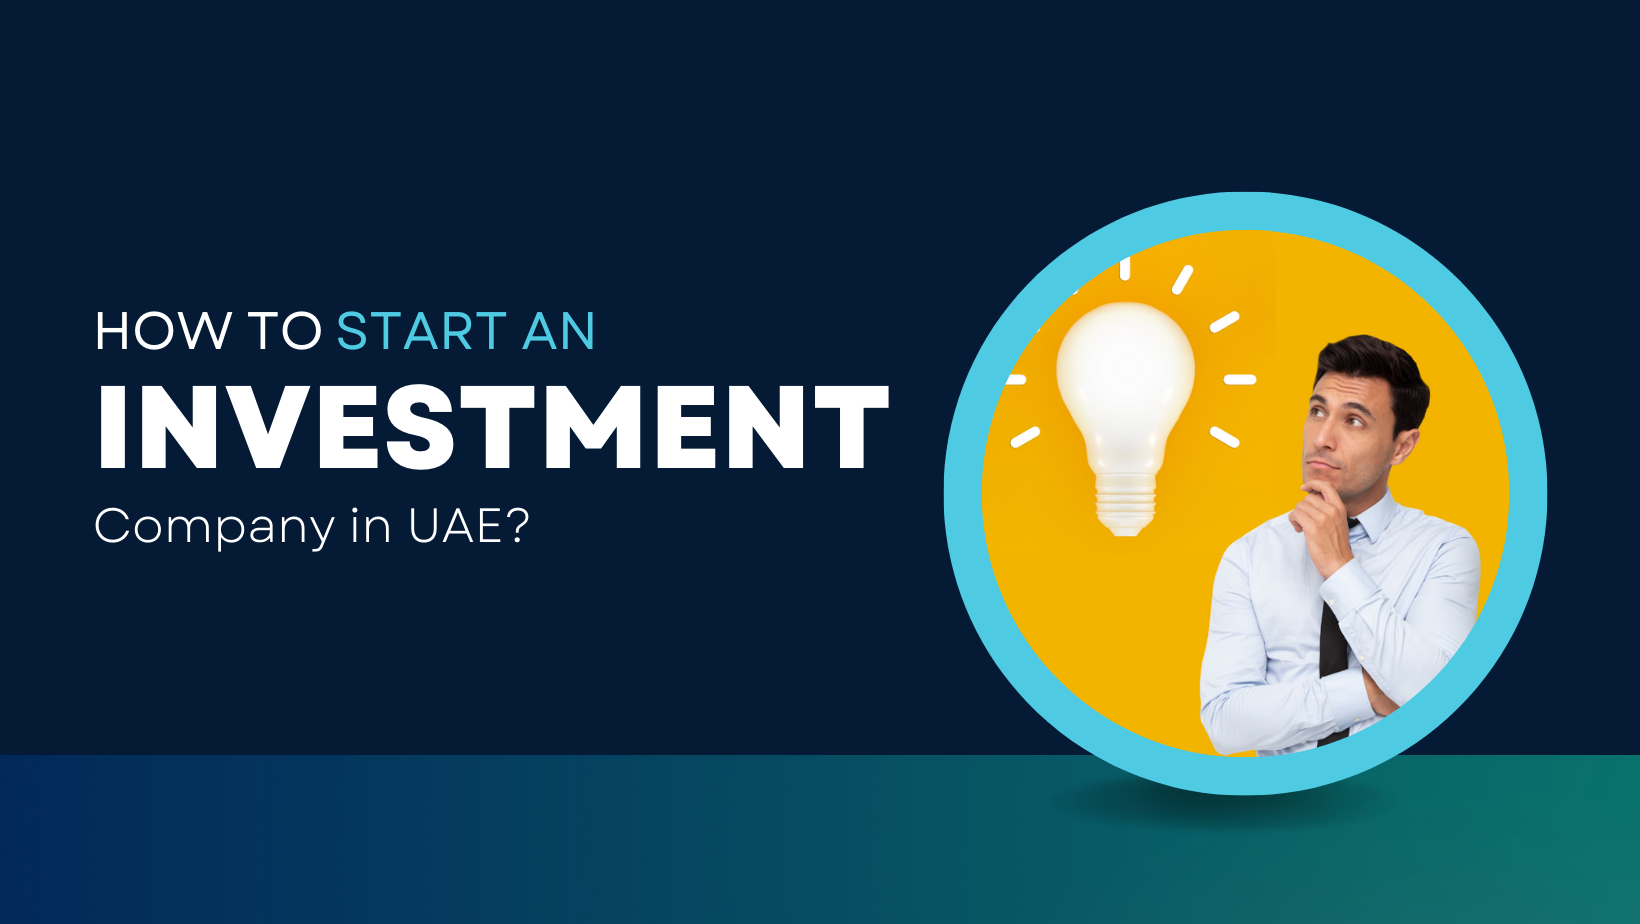 Start an Investment Company in UAE